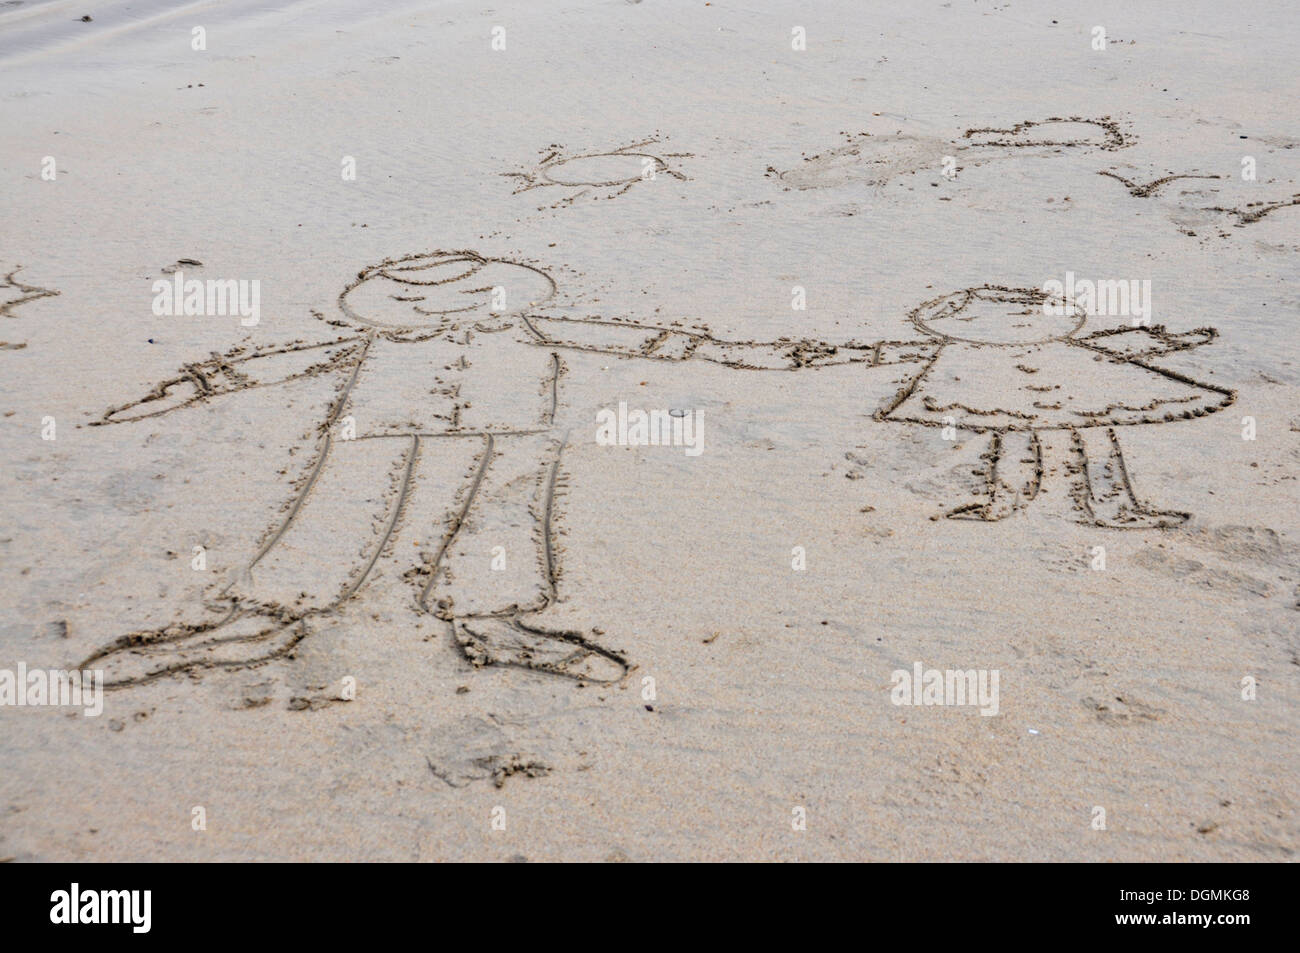 On a sandy beach - drawing with a stick in the sand - simple outlines - boy and girl  holding hands - the sun  - and birds Stock Photo